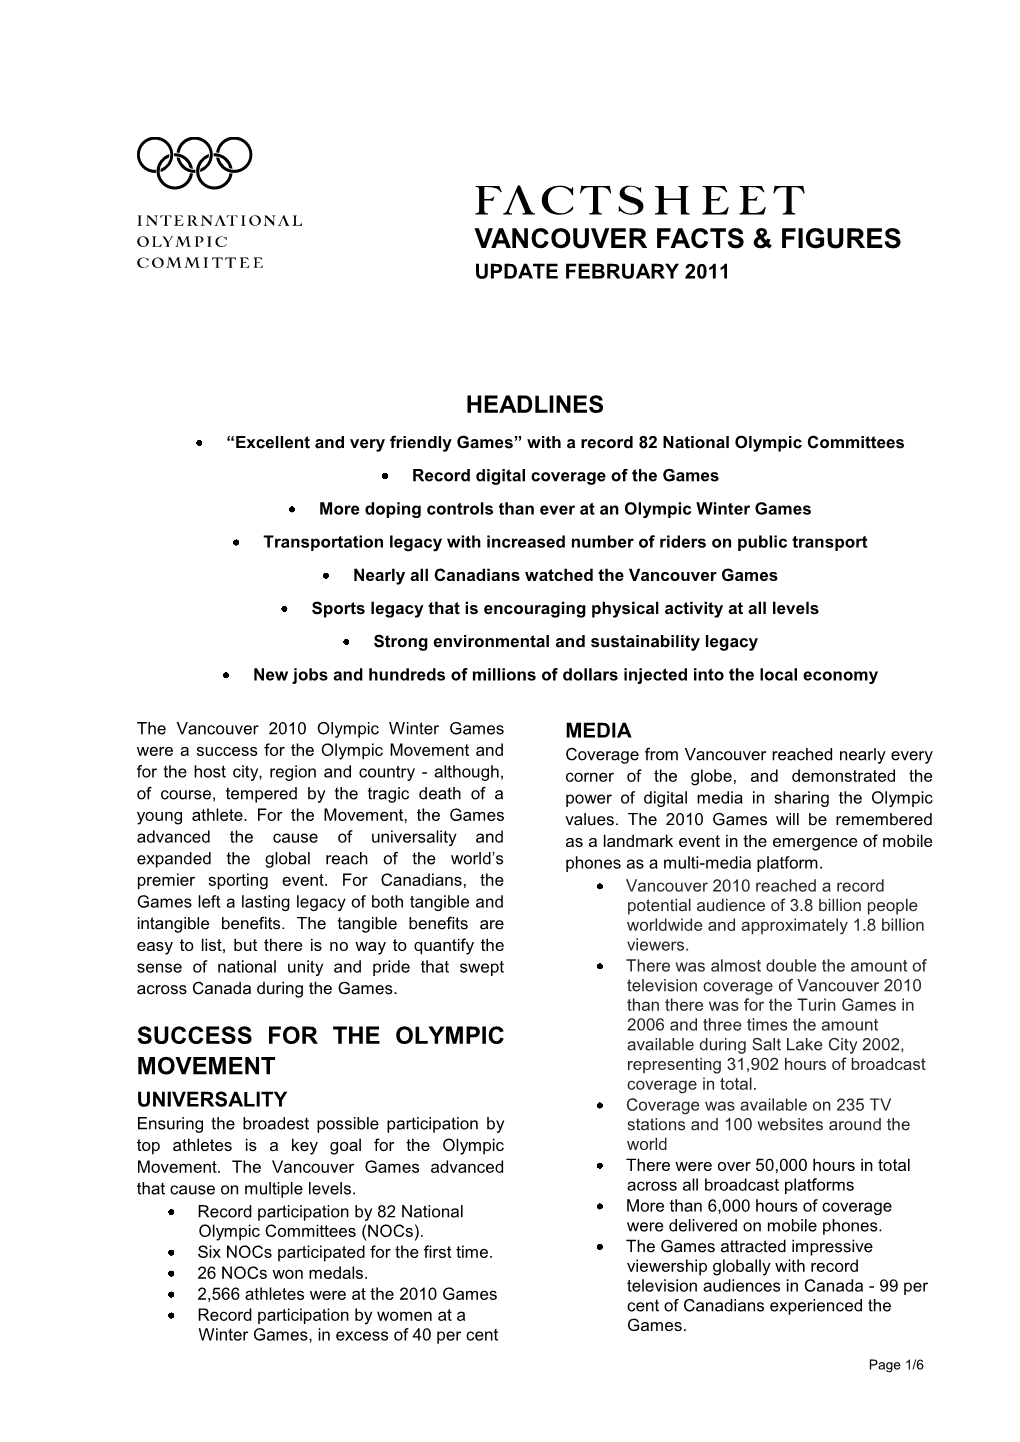 Vancouver 2010 Facts and Figures